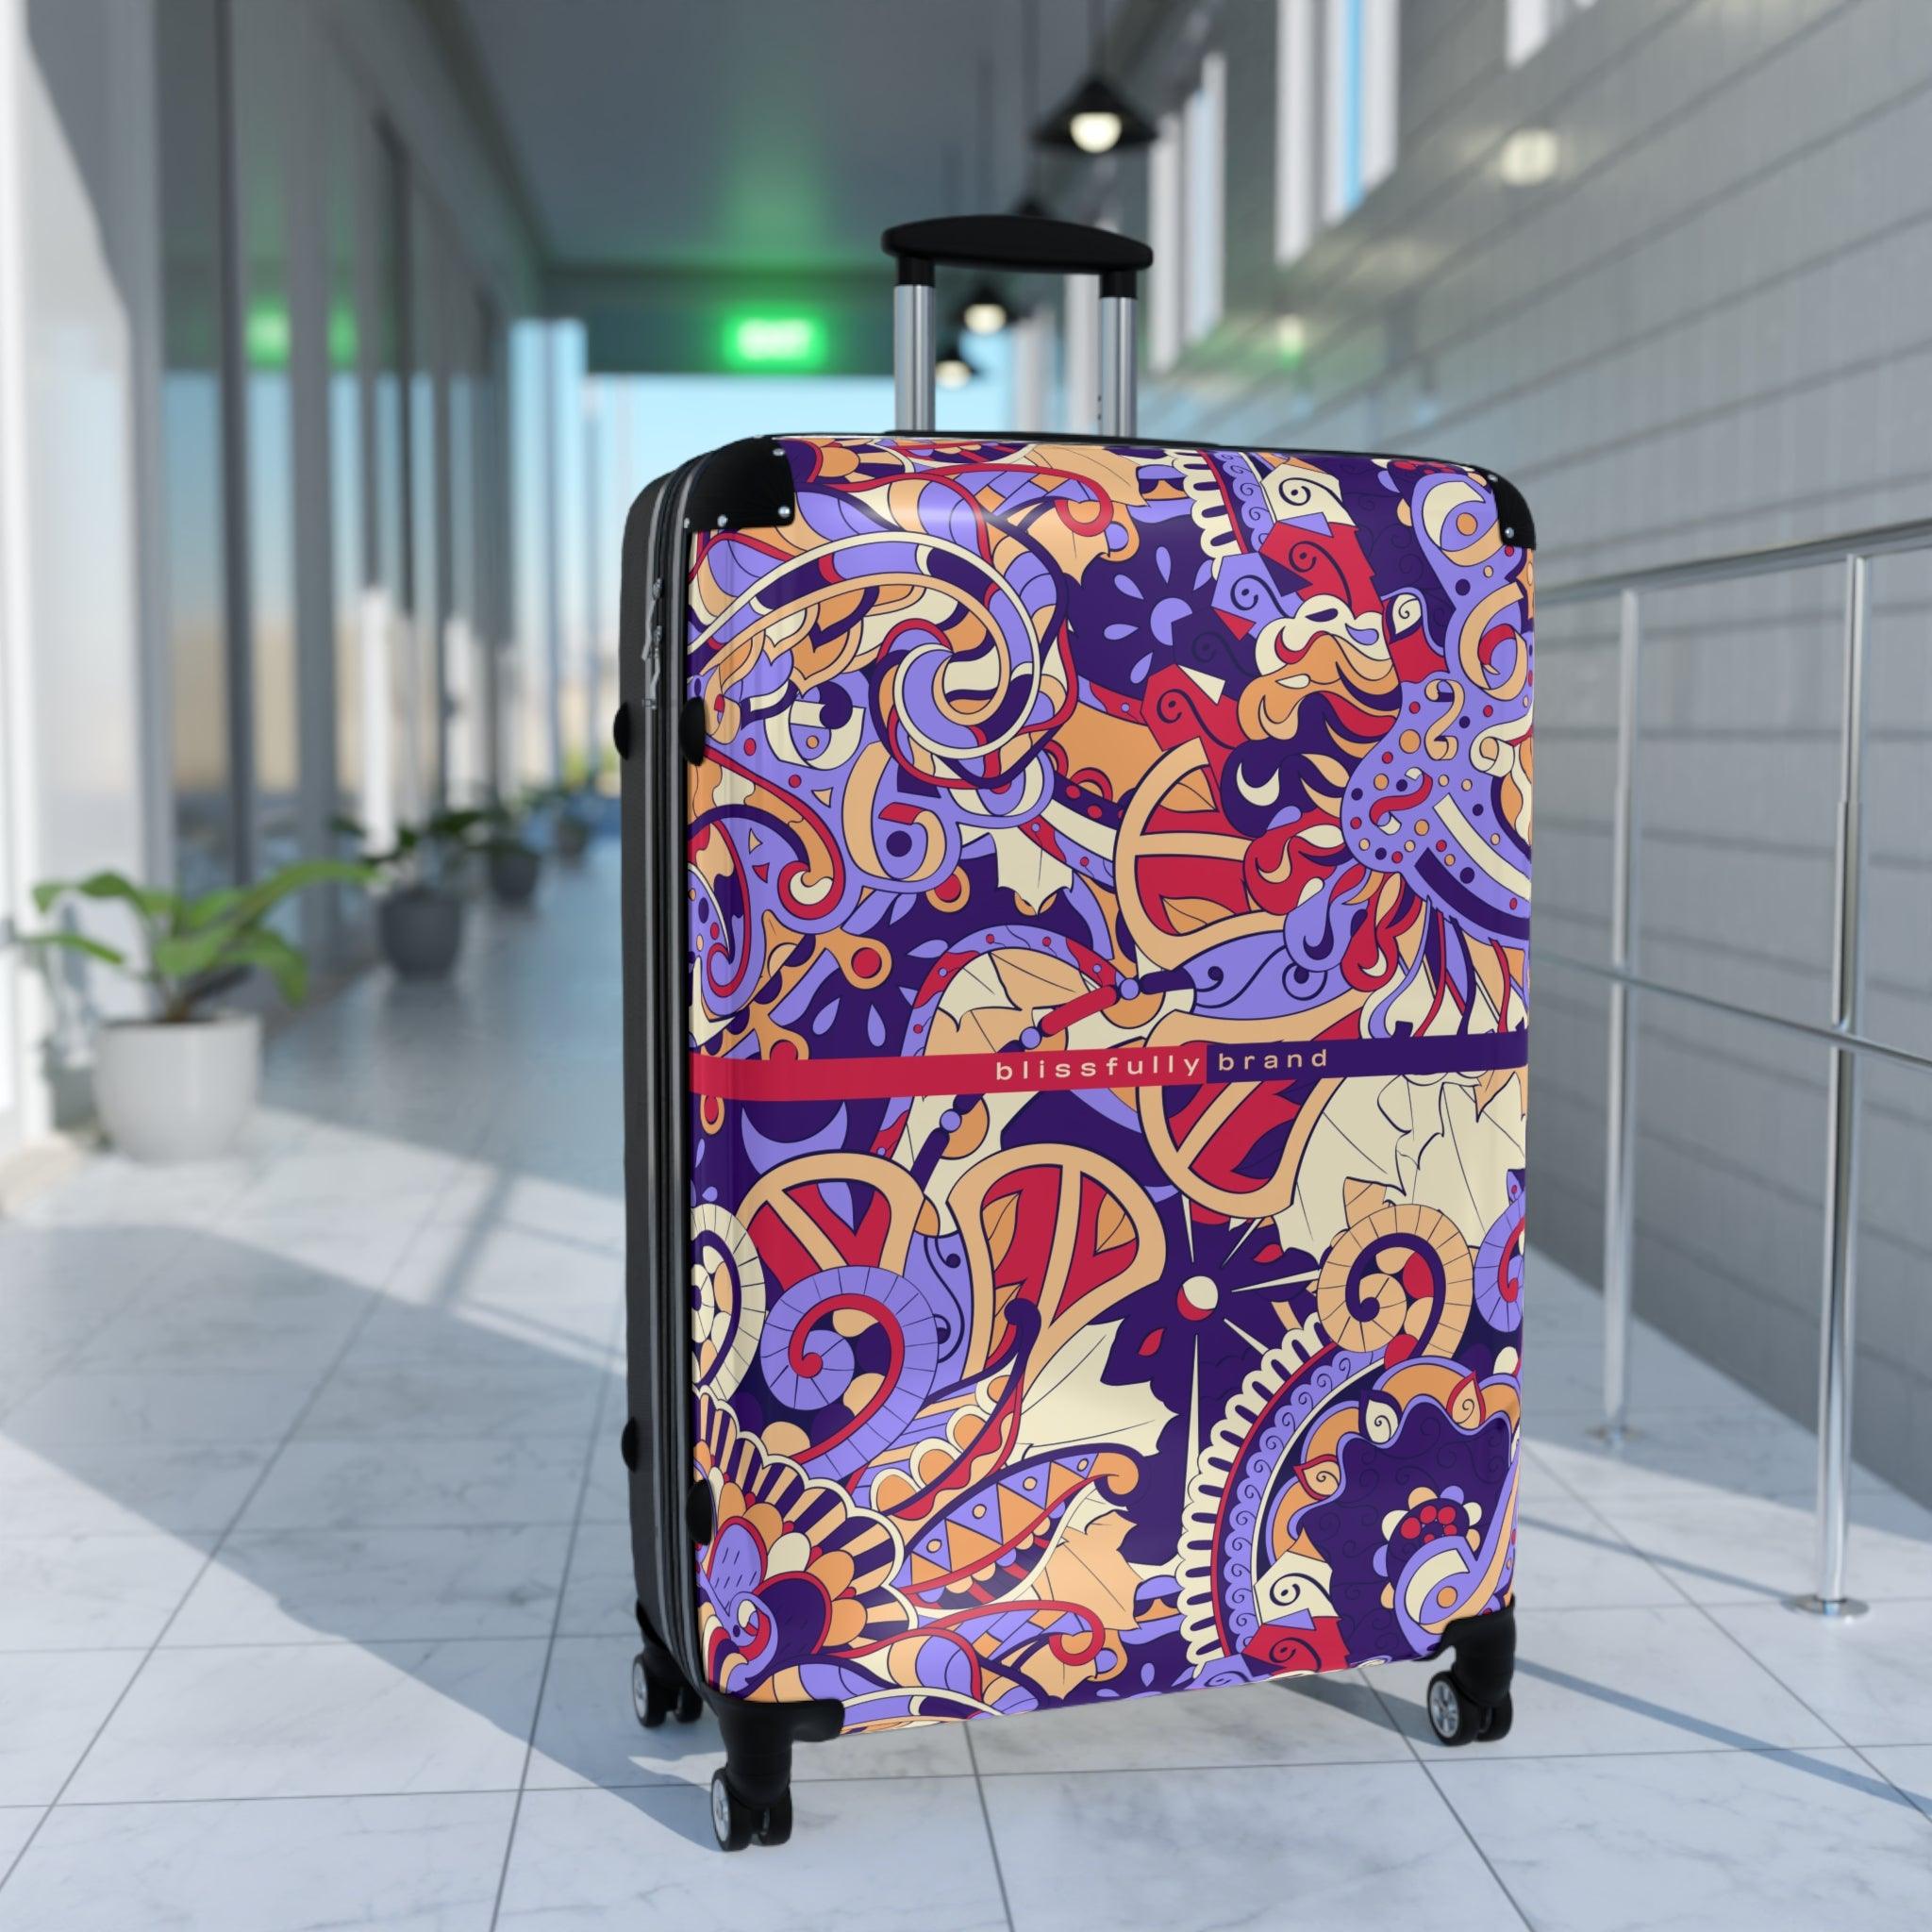 Sechie Luggage Collection - Abstract Kaleidoscope Baroque Paisley Floral Print Psychedelic Retro Swirls Funky Multicolor Check in Carry On Roller 360 Hard Shell Unique Retro Vibrant Bold Eclectic Boho Chic Blue